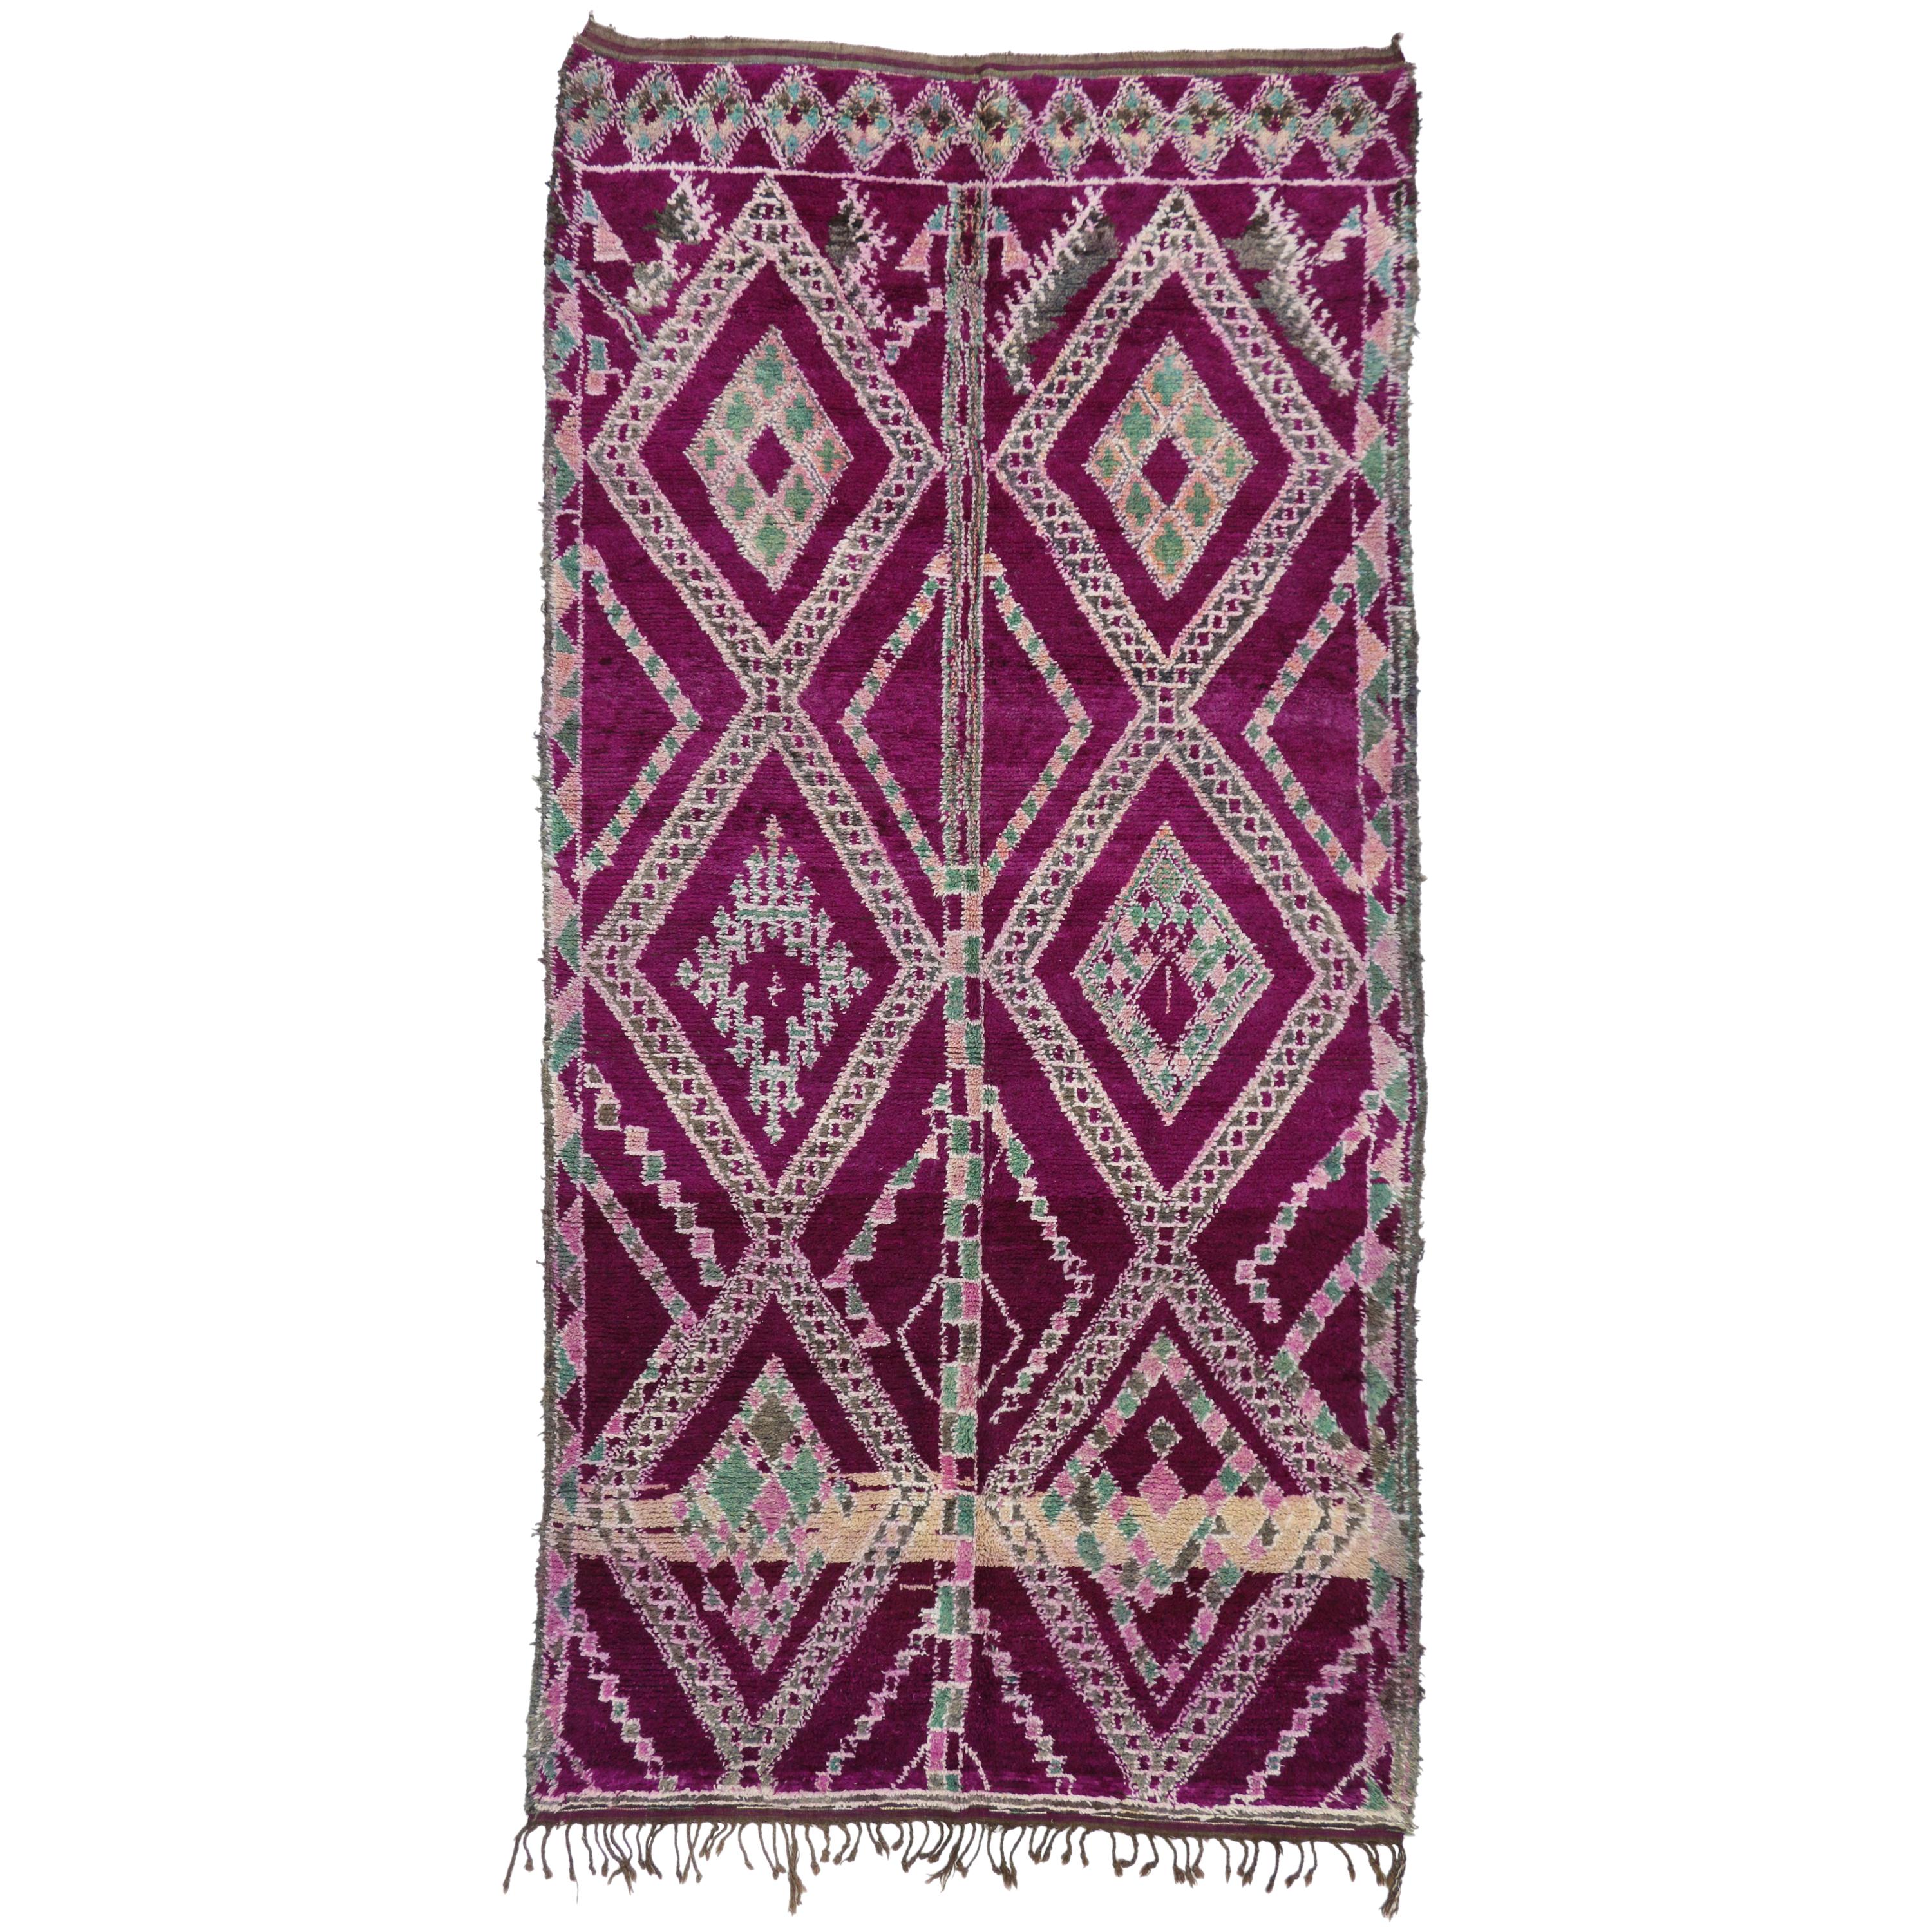 Vintage Magenta-Purple Beni M'Guild Moroccan Rug with Tribal Bohemian Style